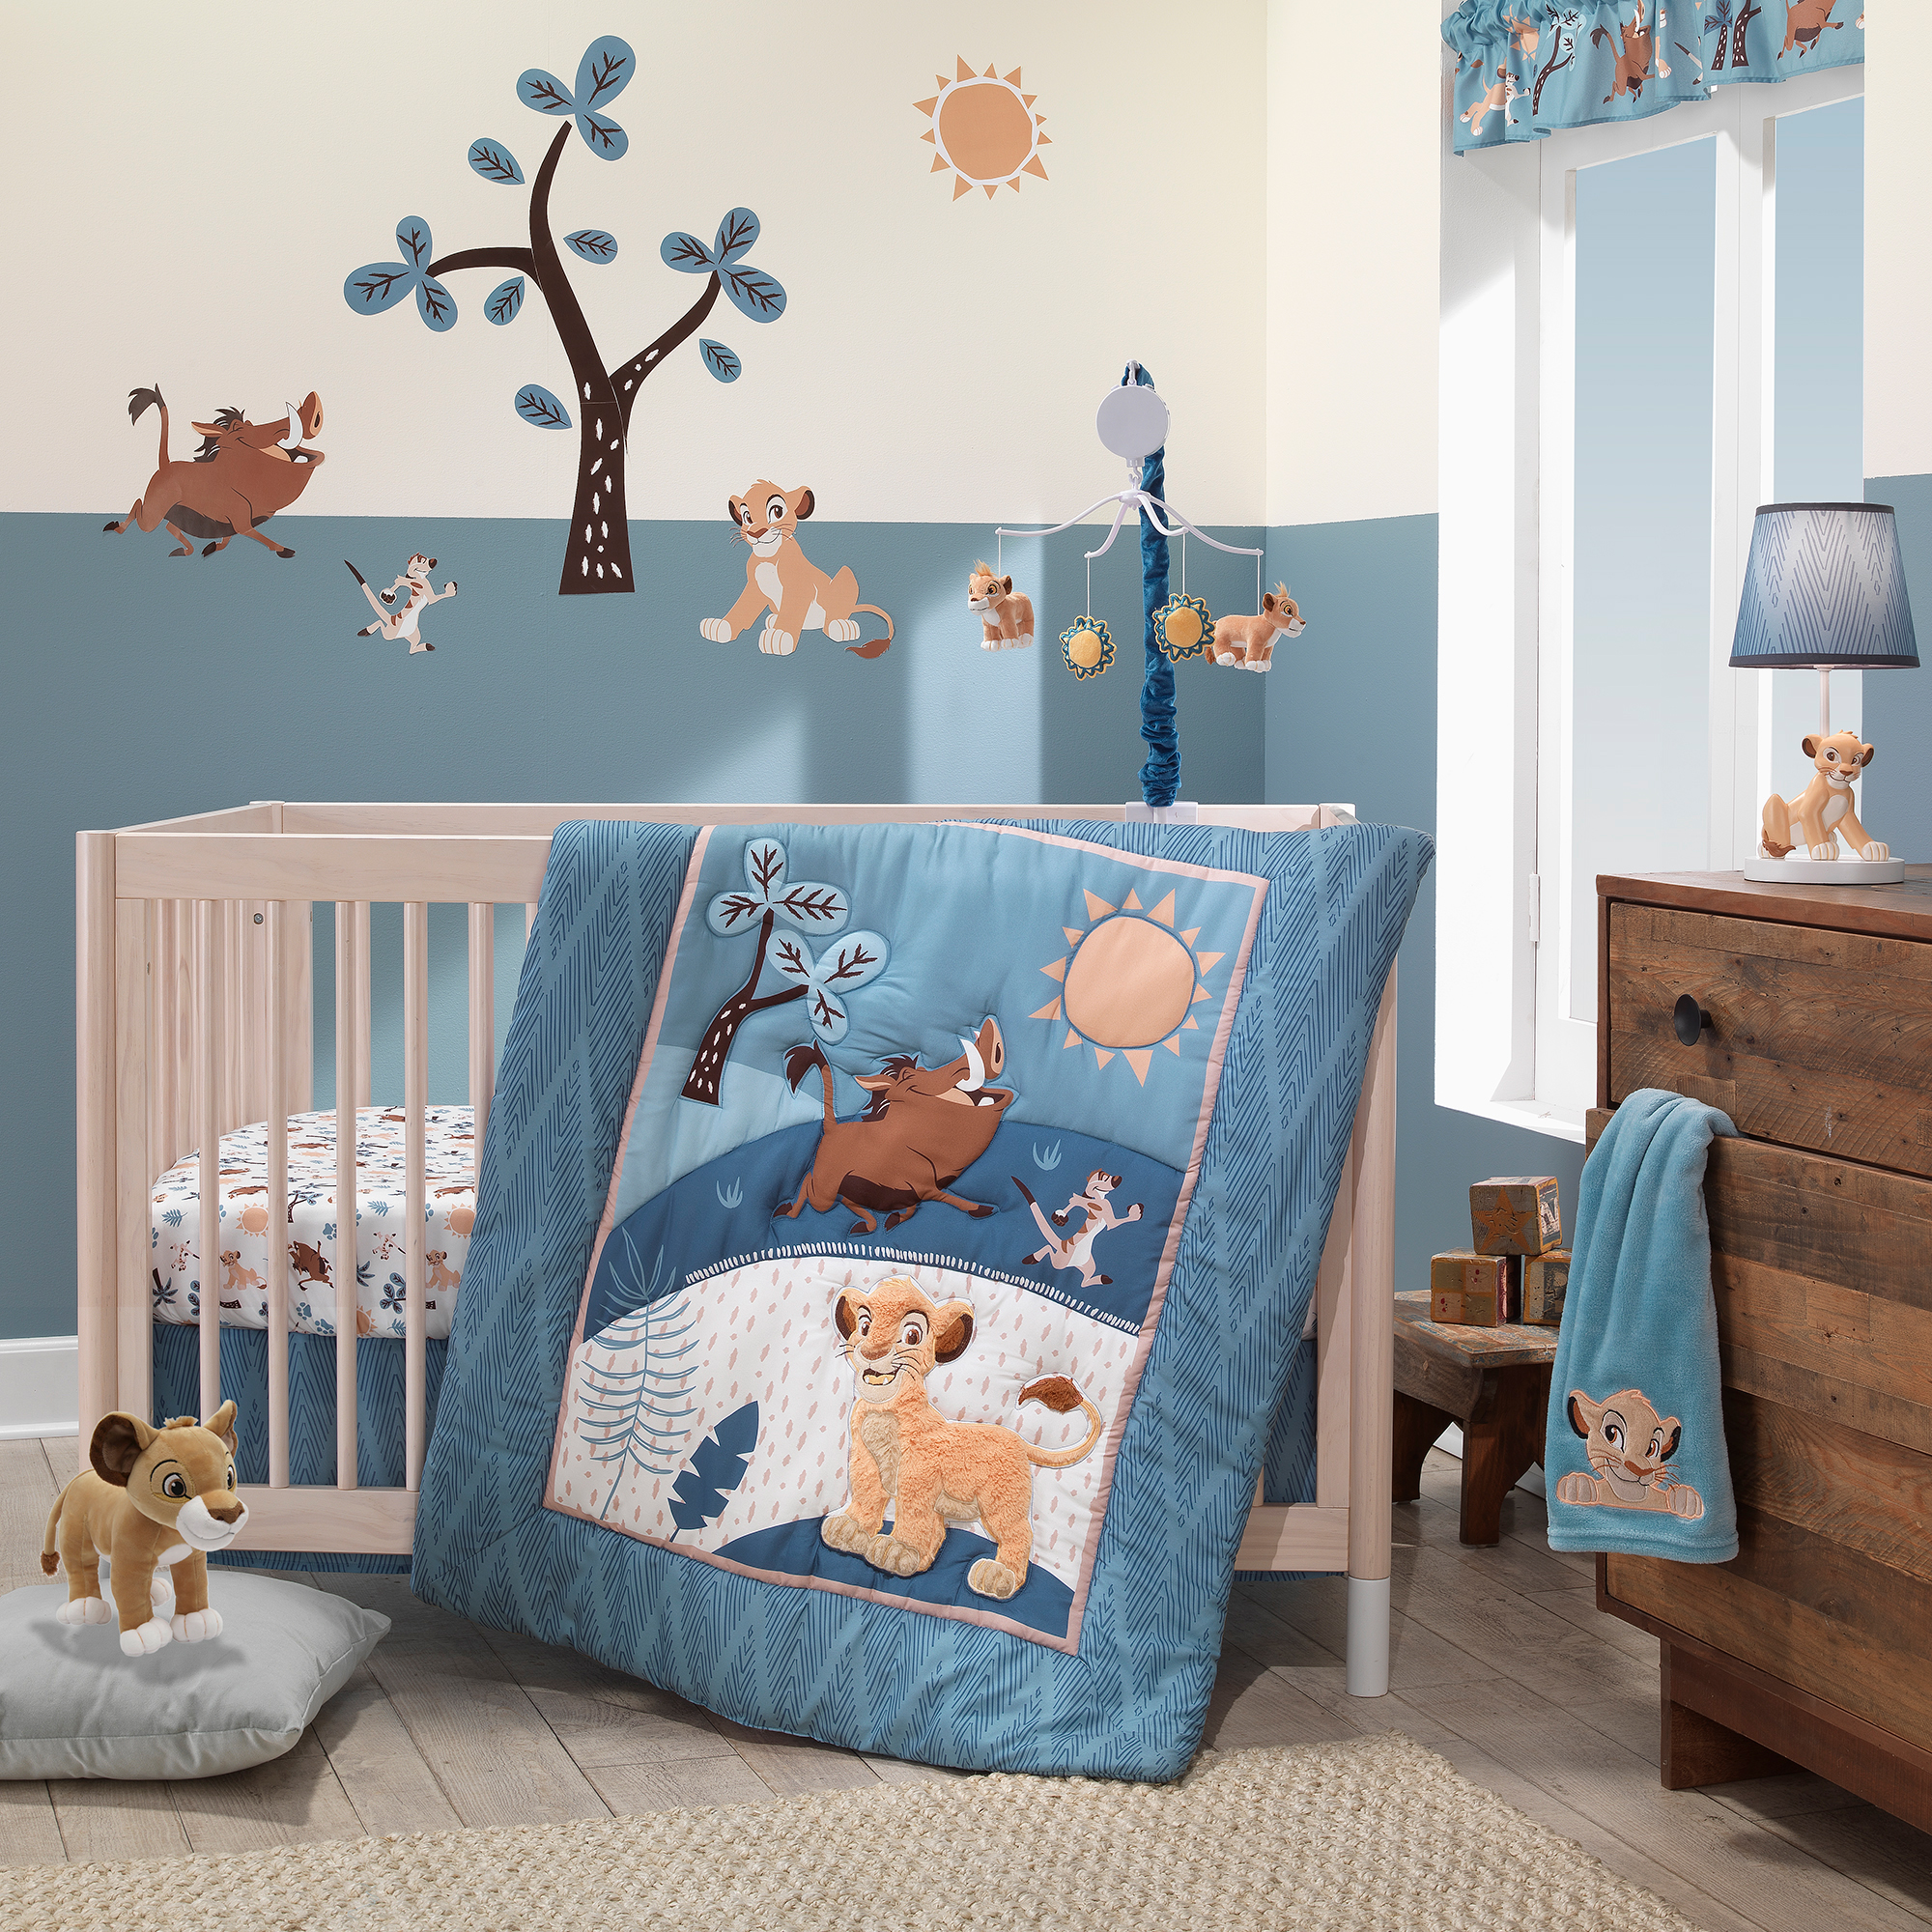 Disney Baby Lion King Adventure Musical Baby Crib Mobile by Lambs & Ivy - Blue - image 4 of 4